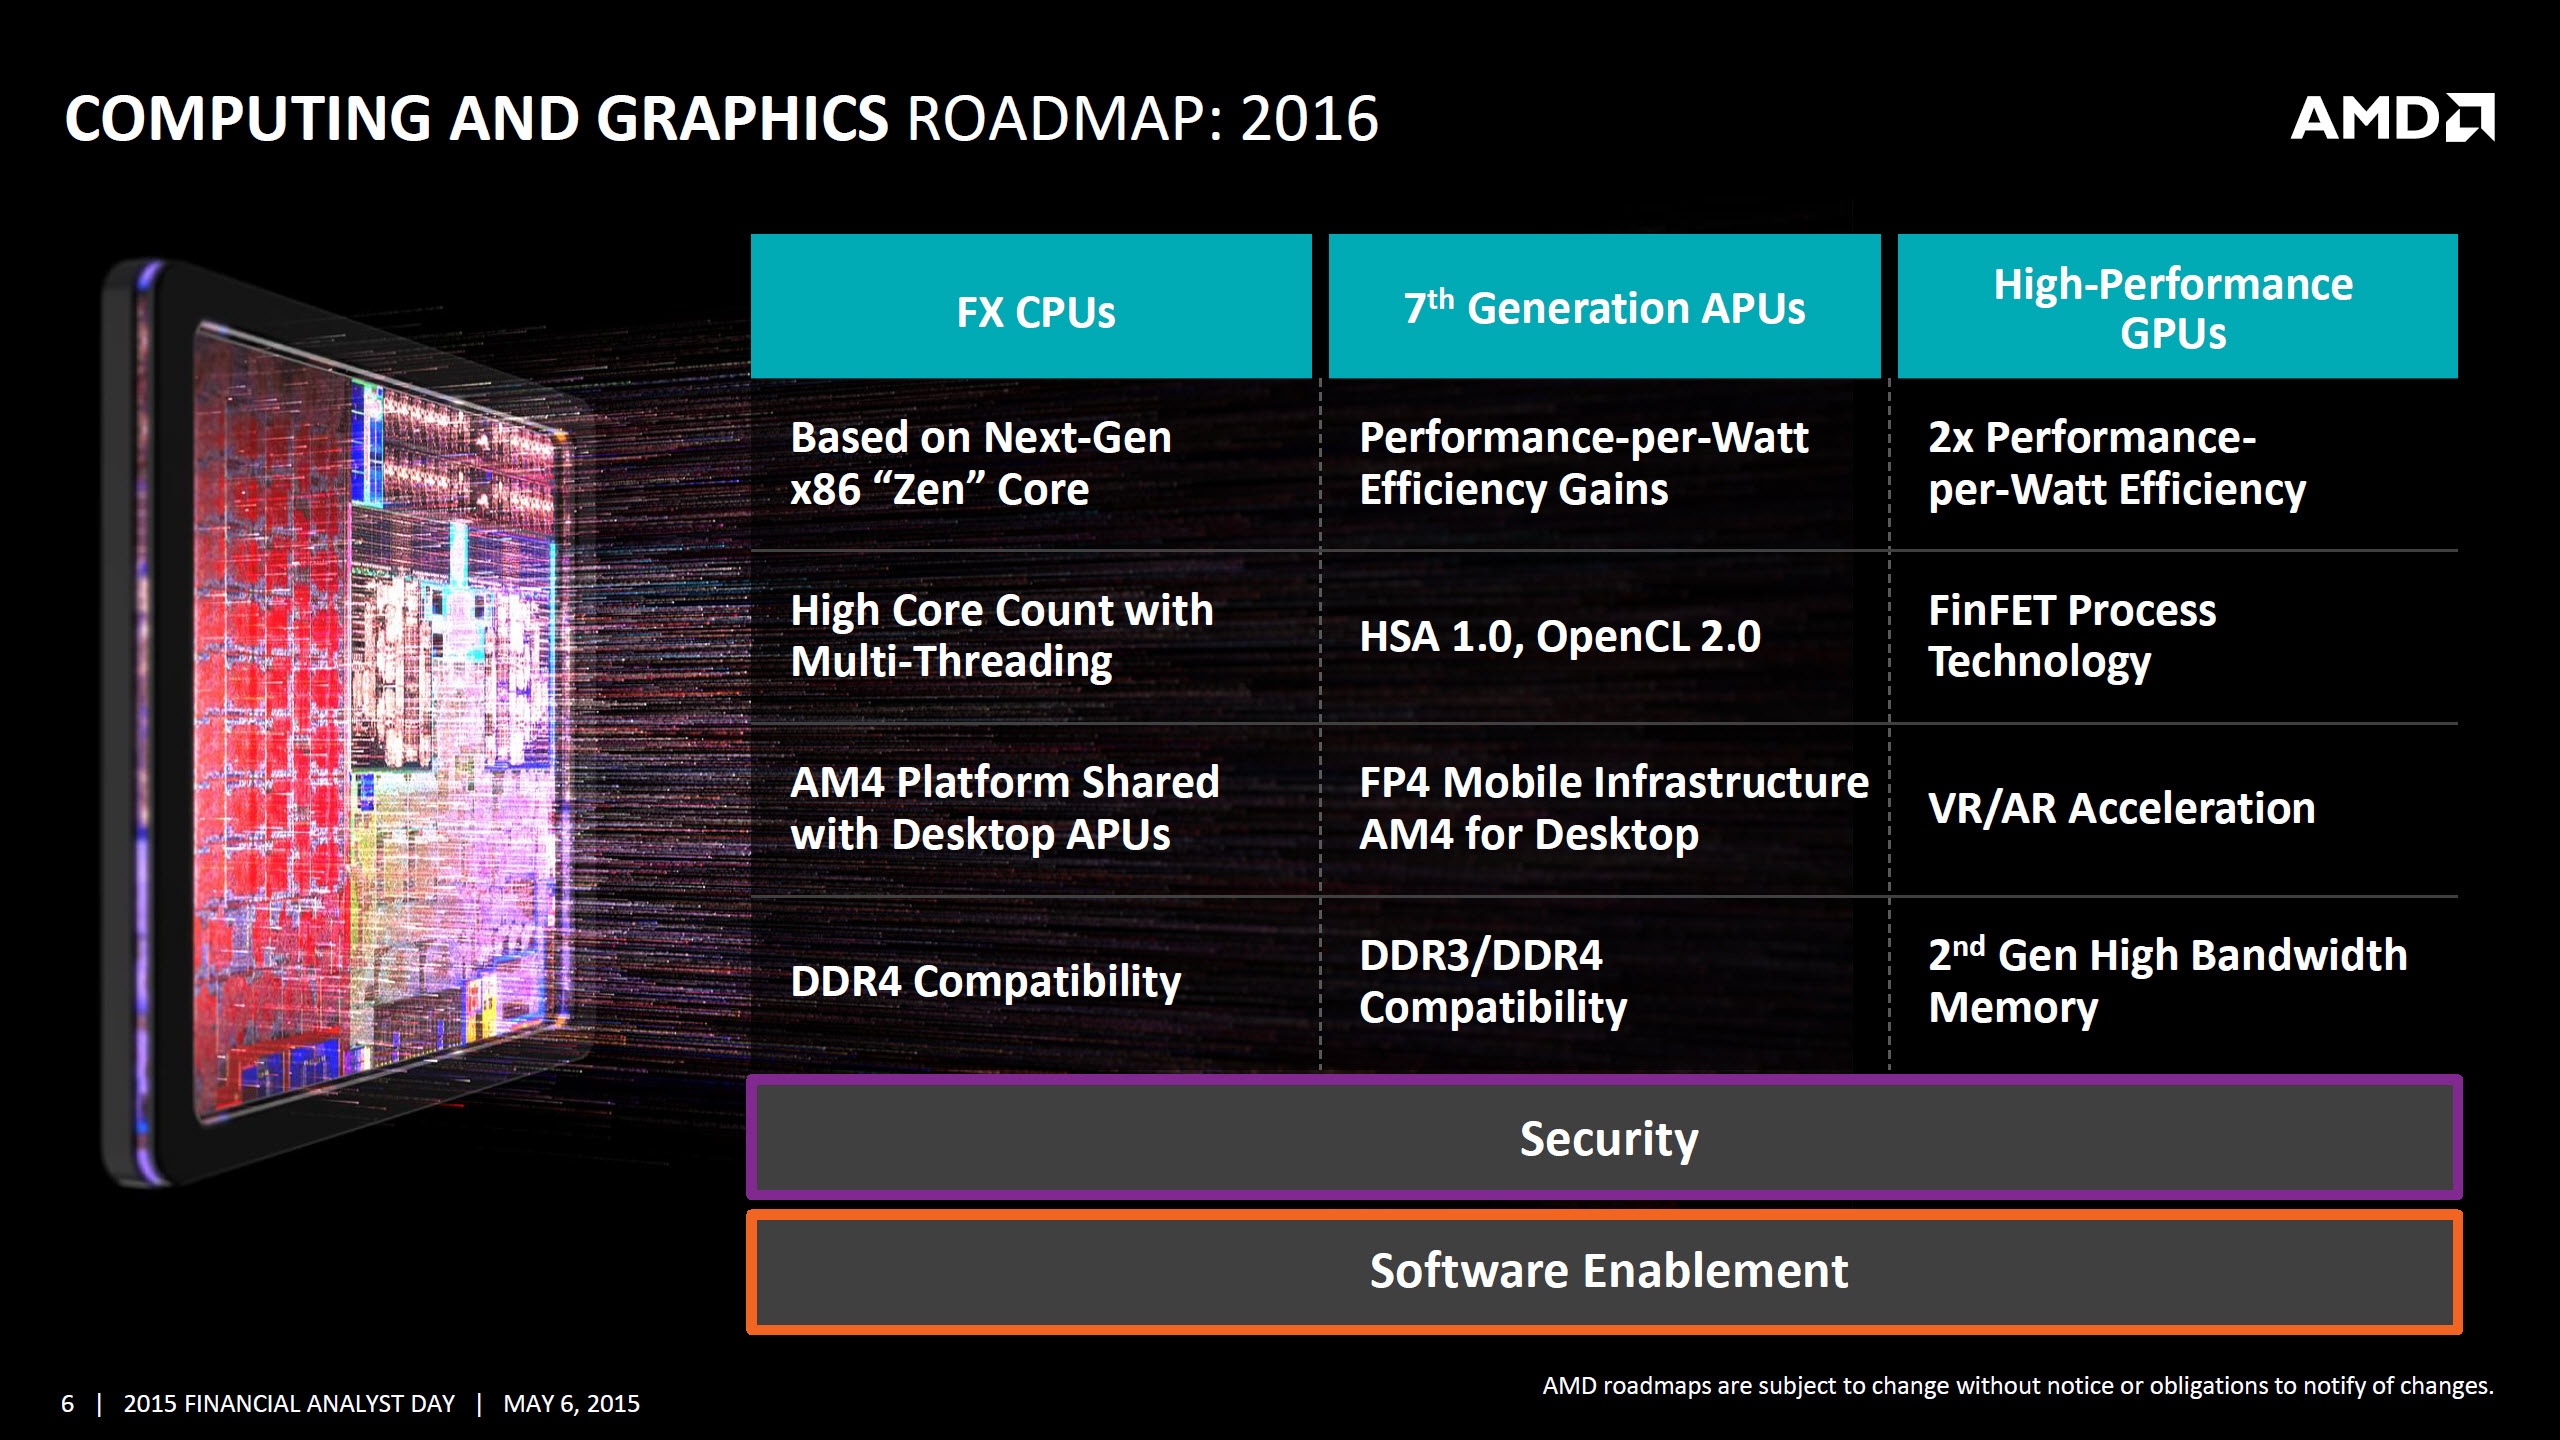 AMD promises two brand new GCN GPUs in 2016